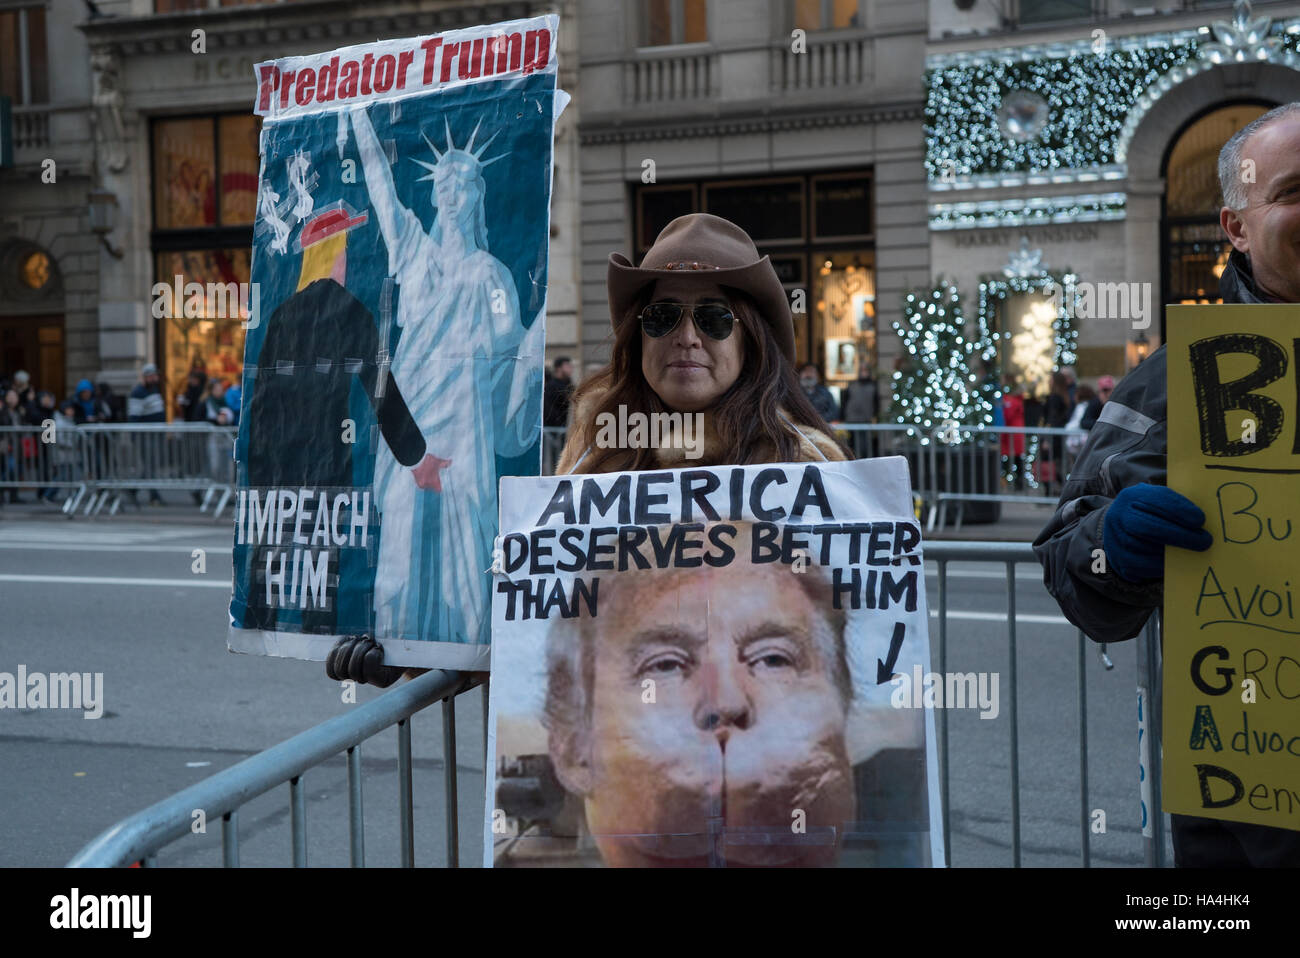 New York City, USA. 26th November, 2016. After the election Trump Tower, a Site that draws Tourists, Under Heavy Security. Blockade around Trump Tower is new normal for New Yorkers. Inside - the restaurants and shops of souvenirs with the symbols of the elected president. Tourists queuing. Activists continue to protest outside the blockade. Credit:  Andrey Borodulin/Alamy Live News Stock Photo